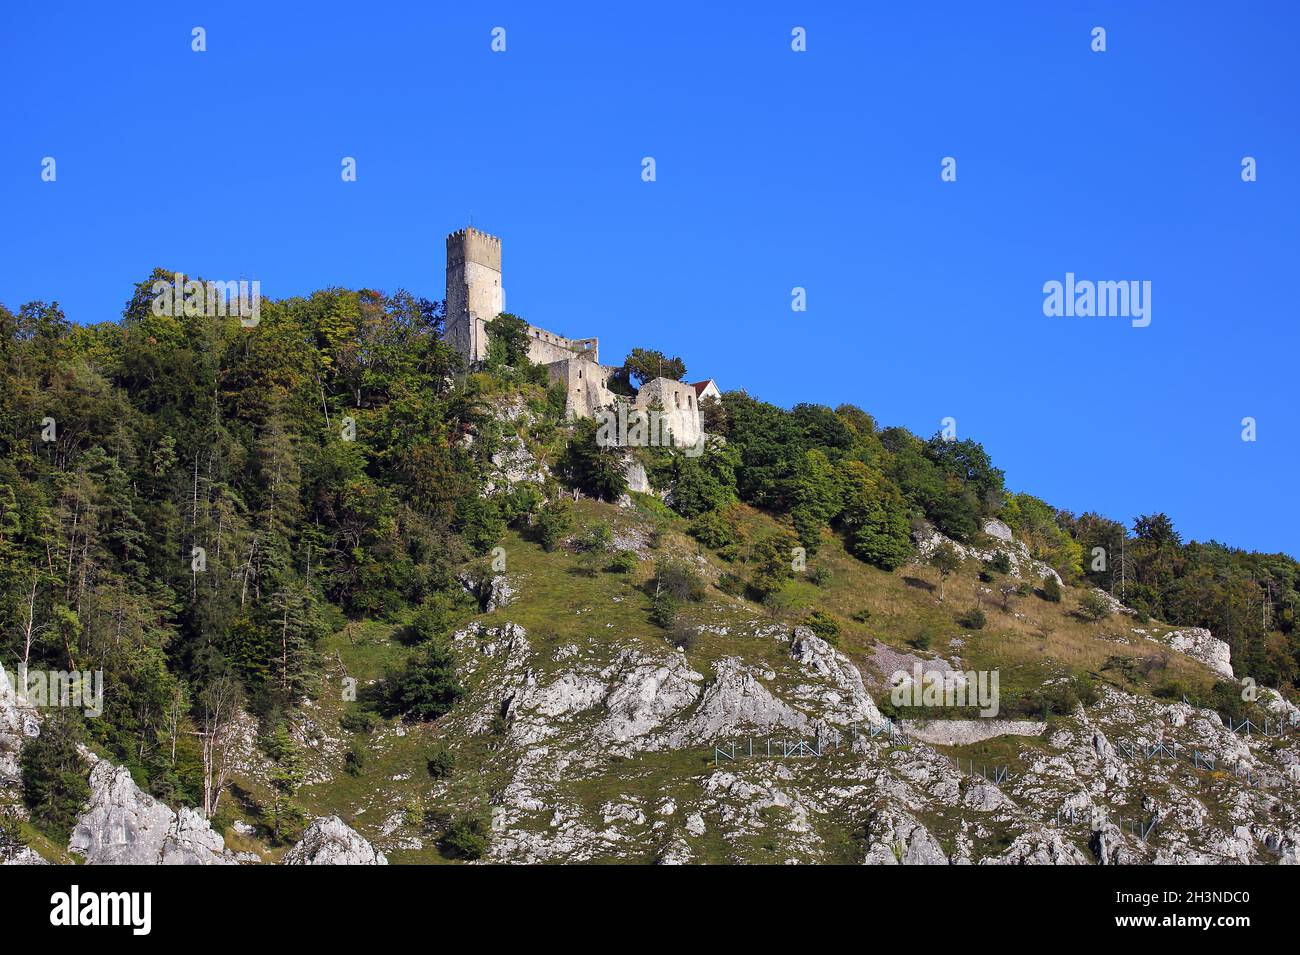 Randeck Castle is a sight in Essing Stock Photo